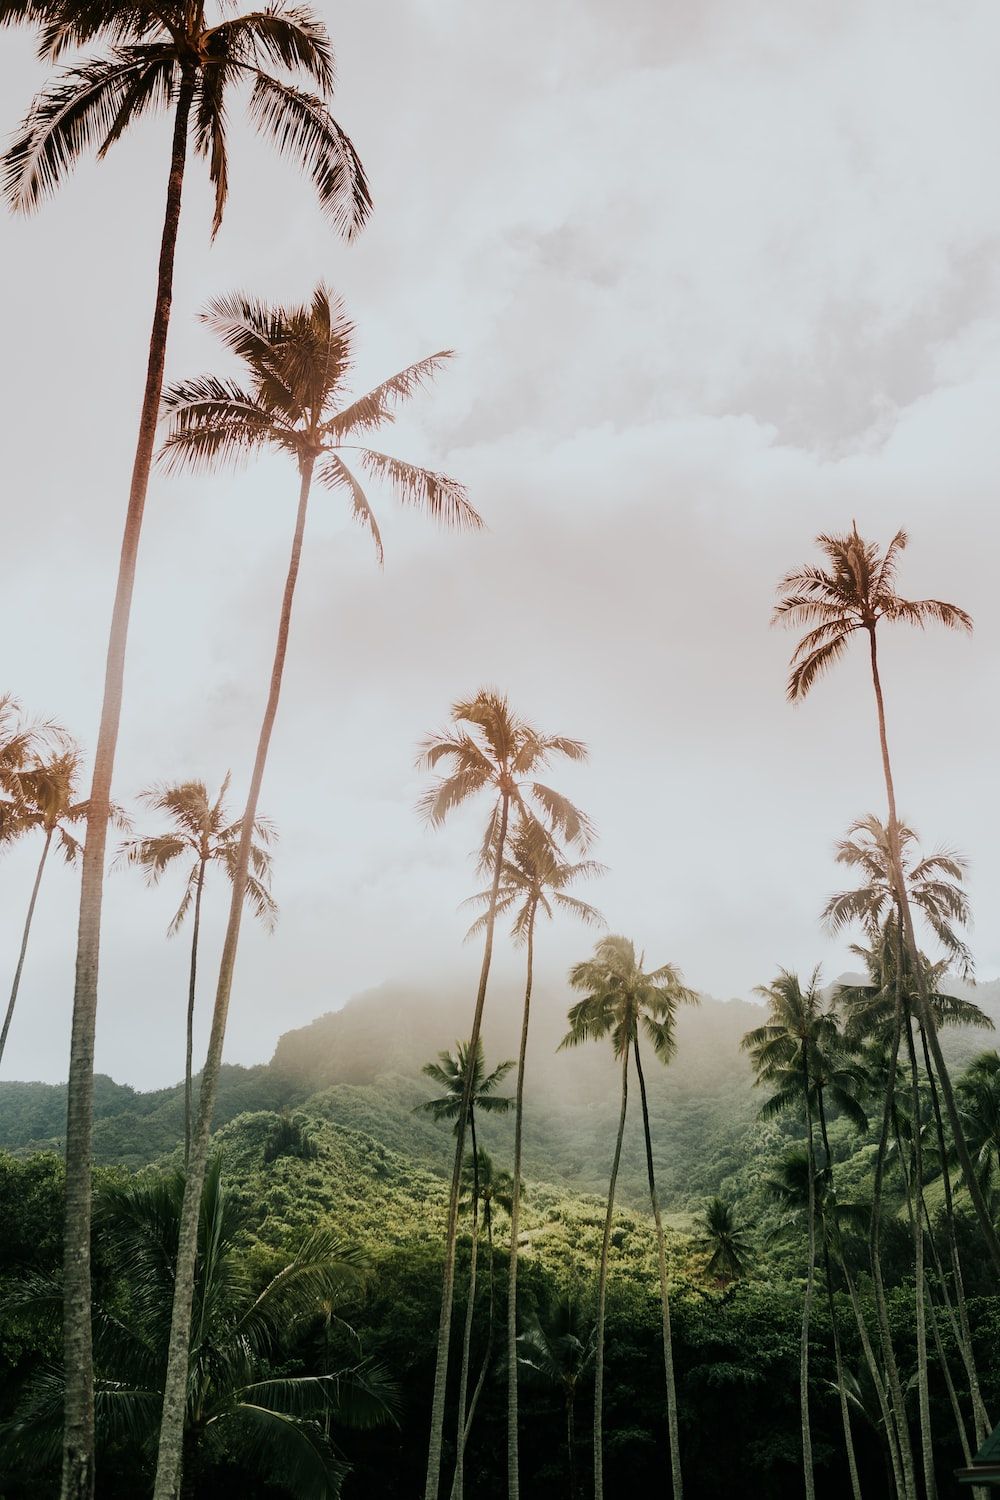 A photo of palm trees in a forest with a mountain in the background. - Tropical, Hawaii, coconut